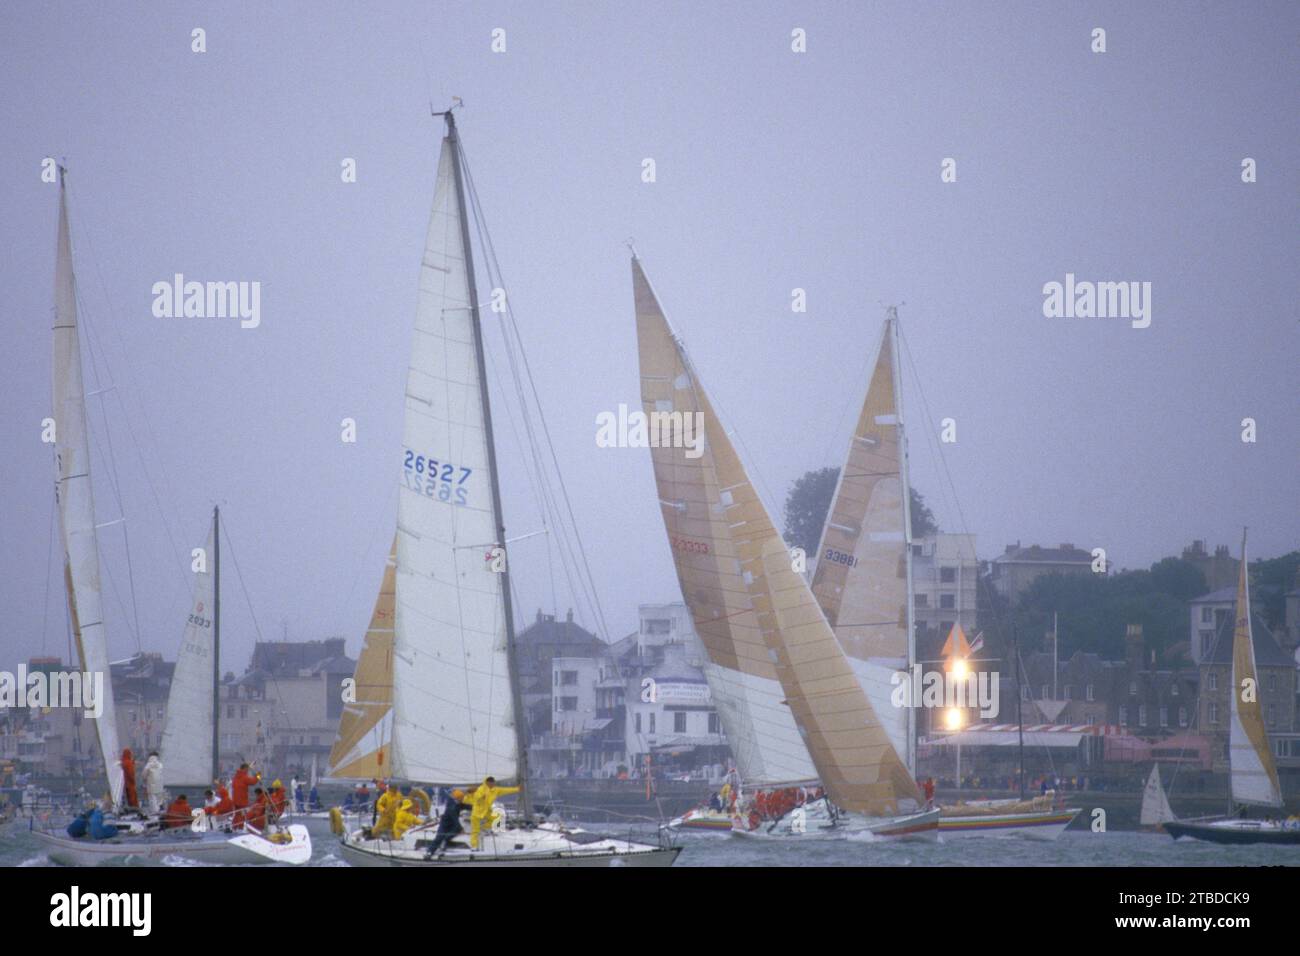 Cowes Sailing Regatta crews wait for the start of the racing, the two lights are to assist the yachts to identify the start line but don’t form the line. Cowes, Isle of Wight, England circa August 1985 1980s UK HOMER SYKES Stock Photo